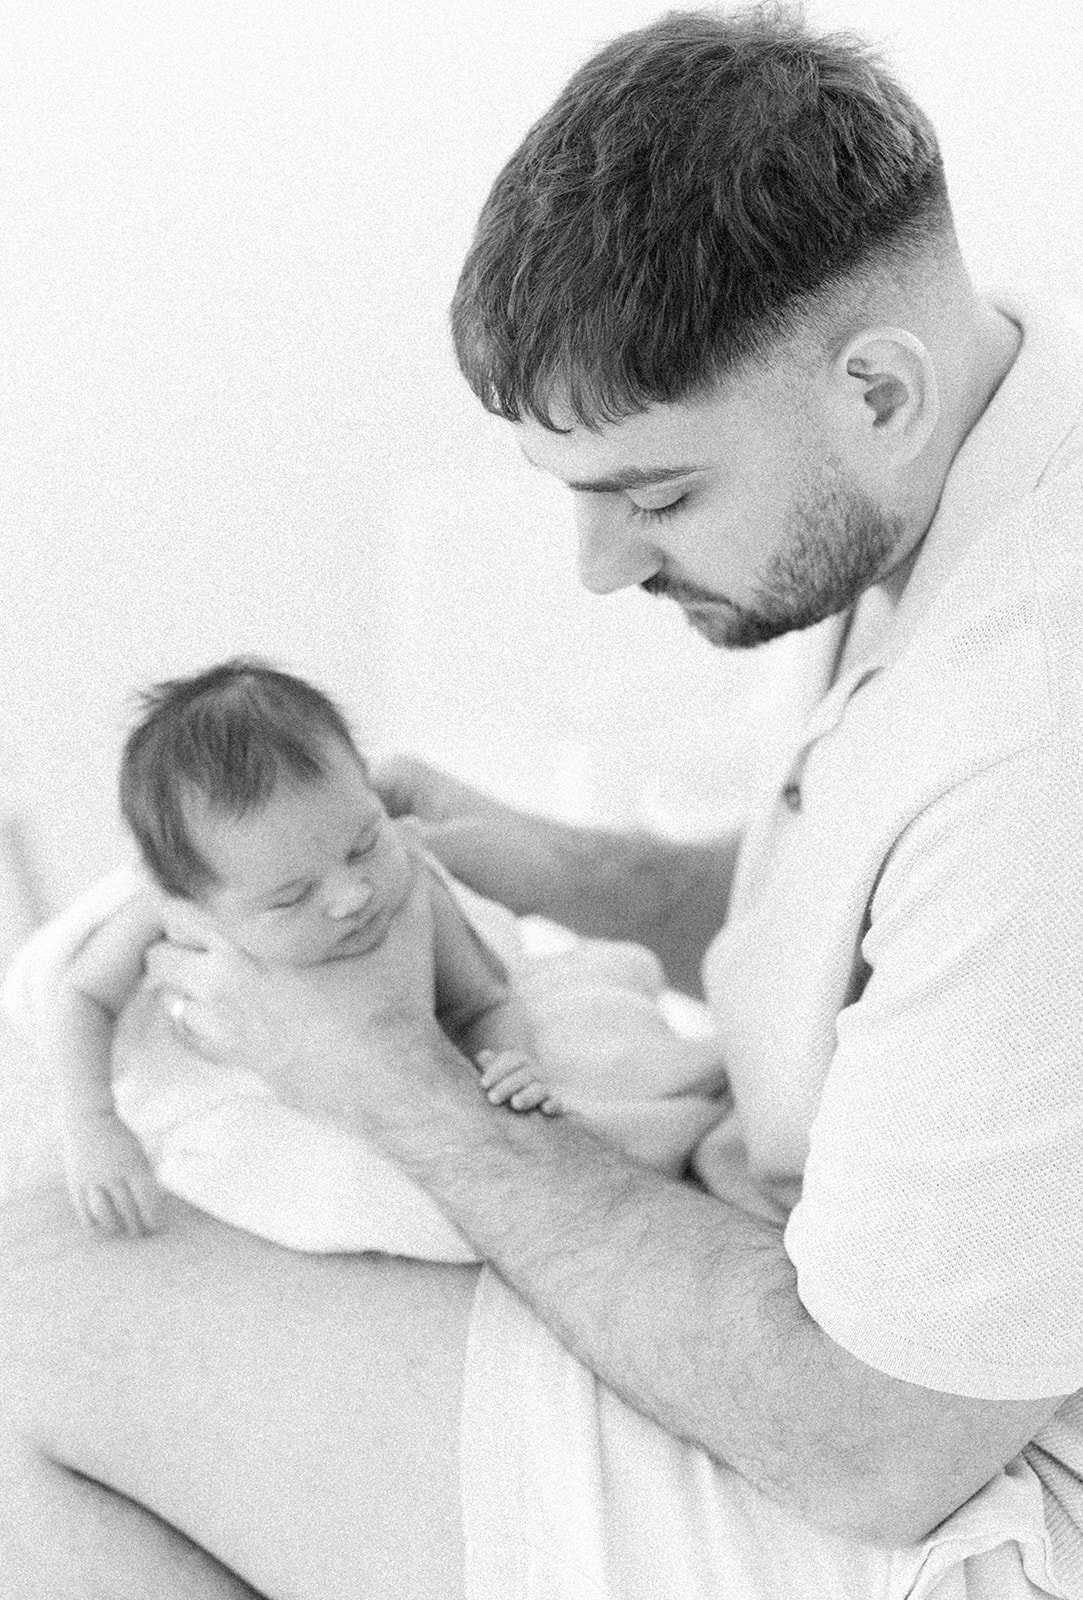 A black and white photo of a dad burping his newborn baby girl